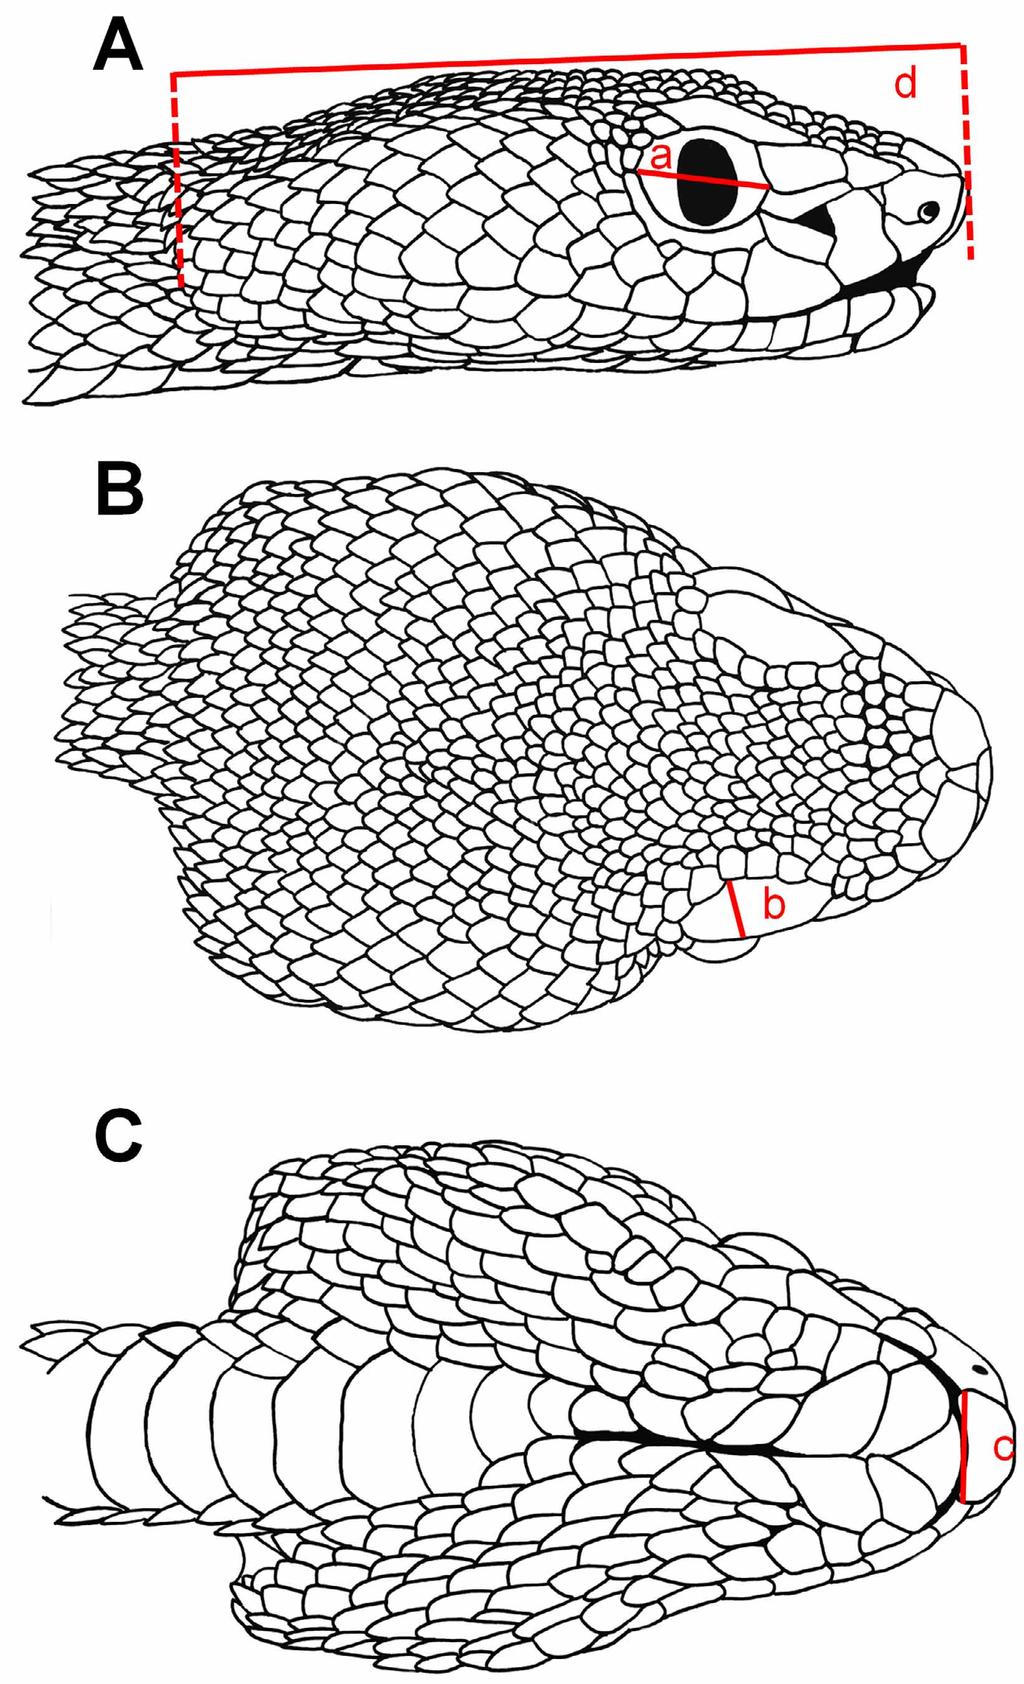 FIGURE 3. Line drawings of the head scalation of the holotype of Cryptelytrops cardamomensis sp. nov. (FMNH 259191) A. lateral, B. dorsal, C. ventral.